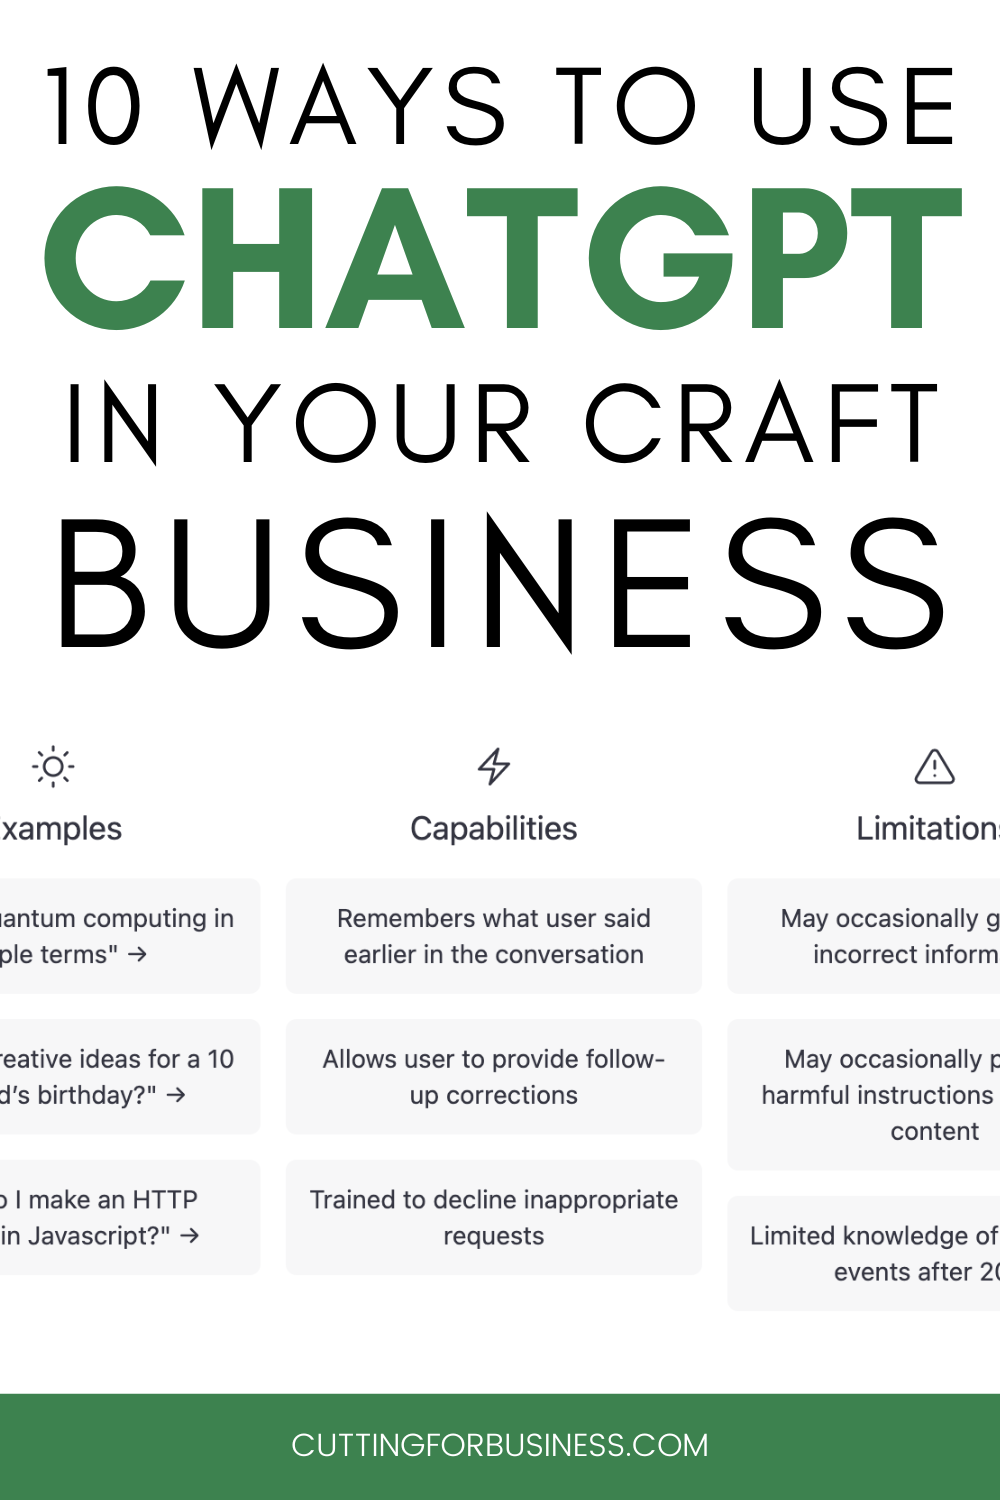 10 Ways to Use ChatGPT in Your Craft Business - cuttingforbusiness.com.